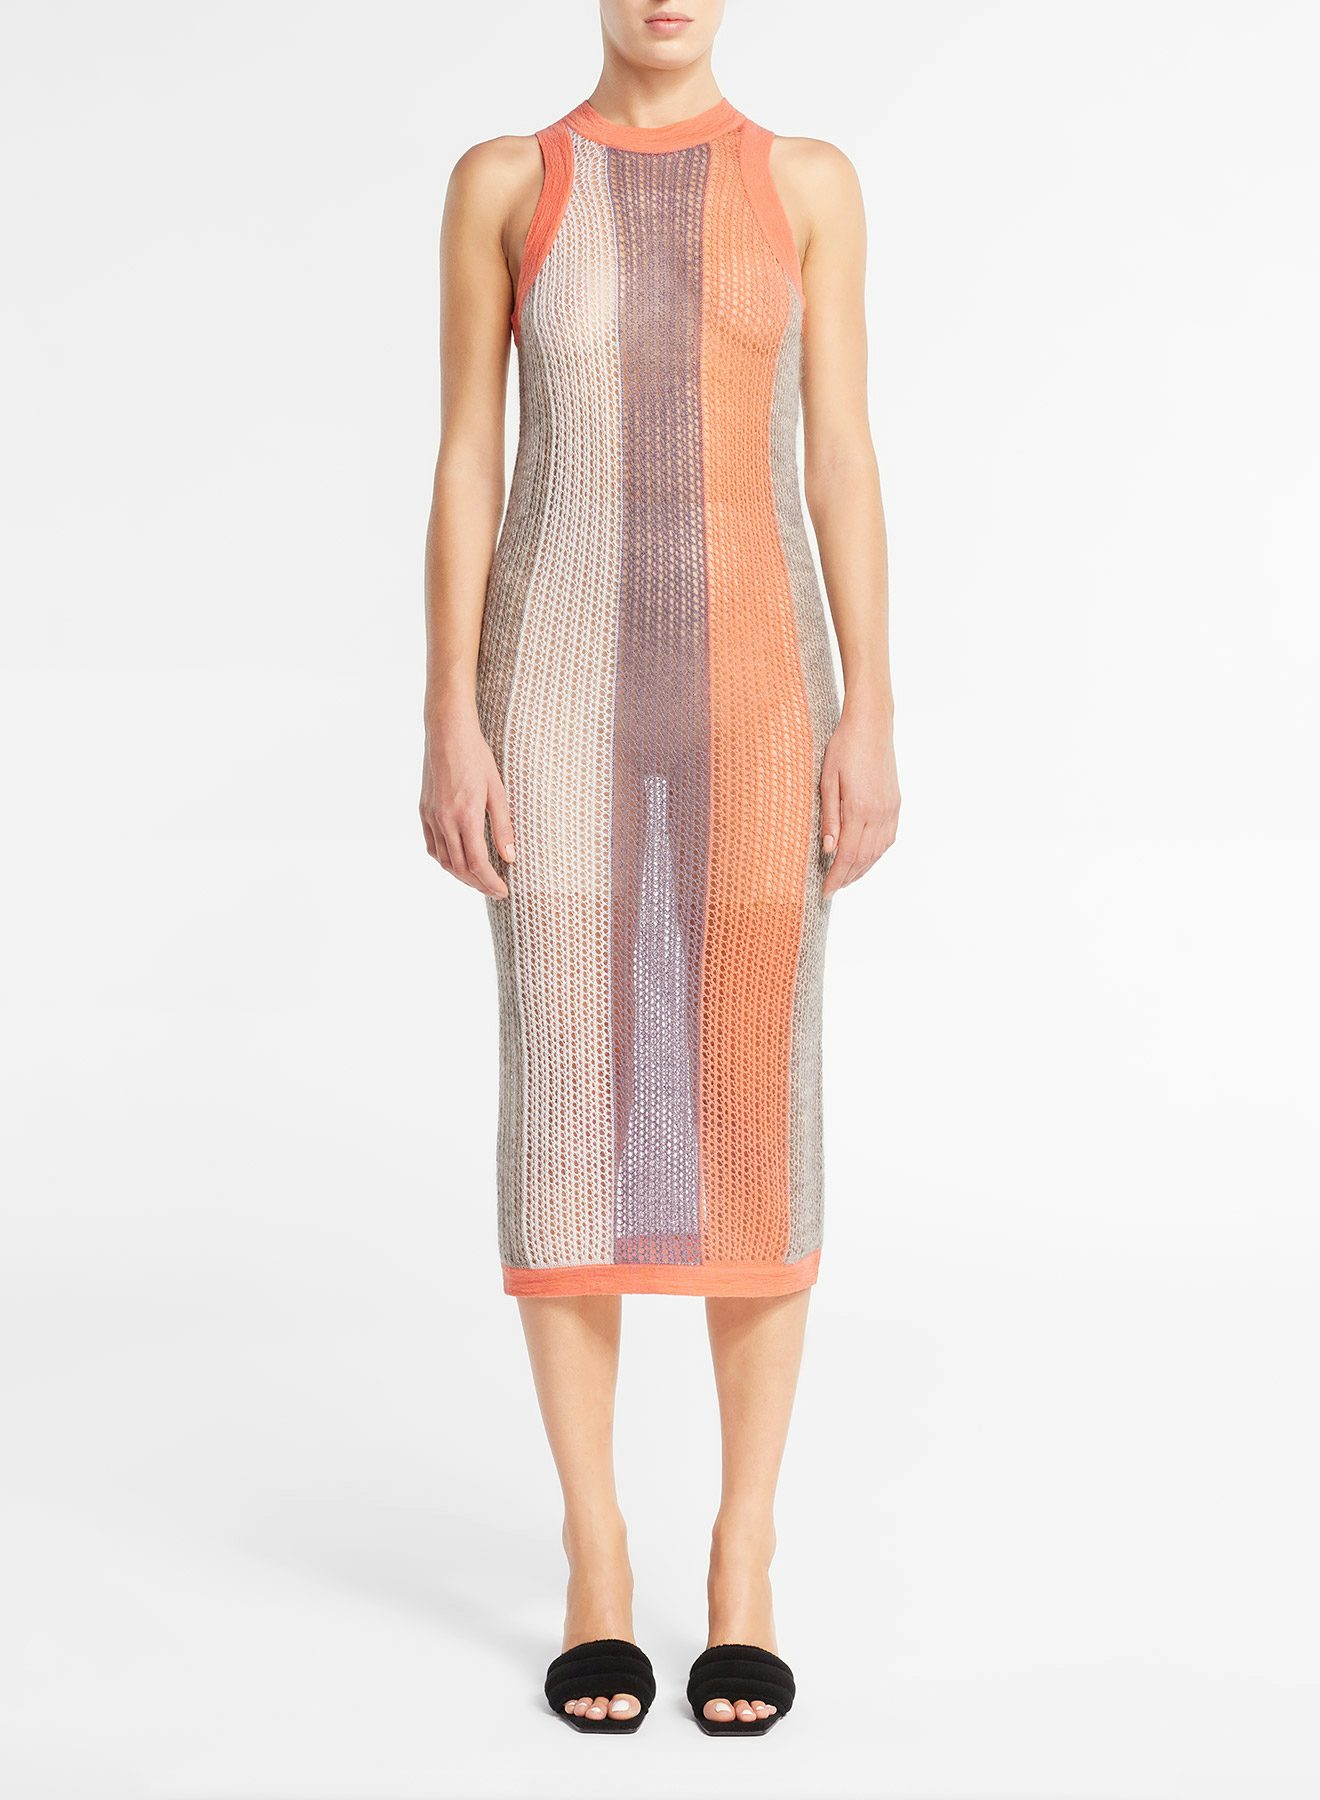 Peach, Grey and Lilac Mohair Fishnet Tank Top Dress